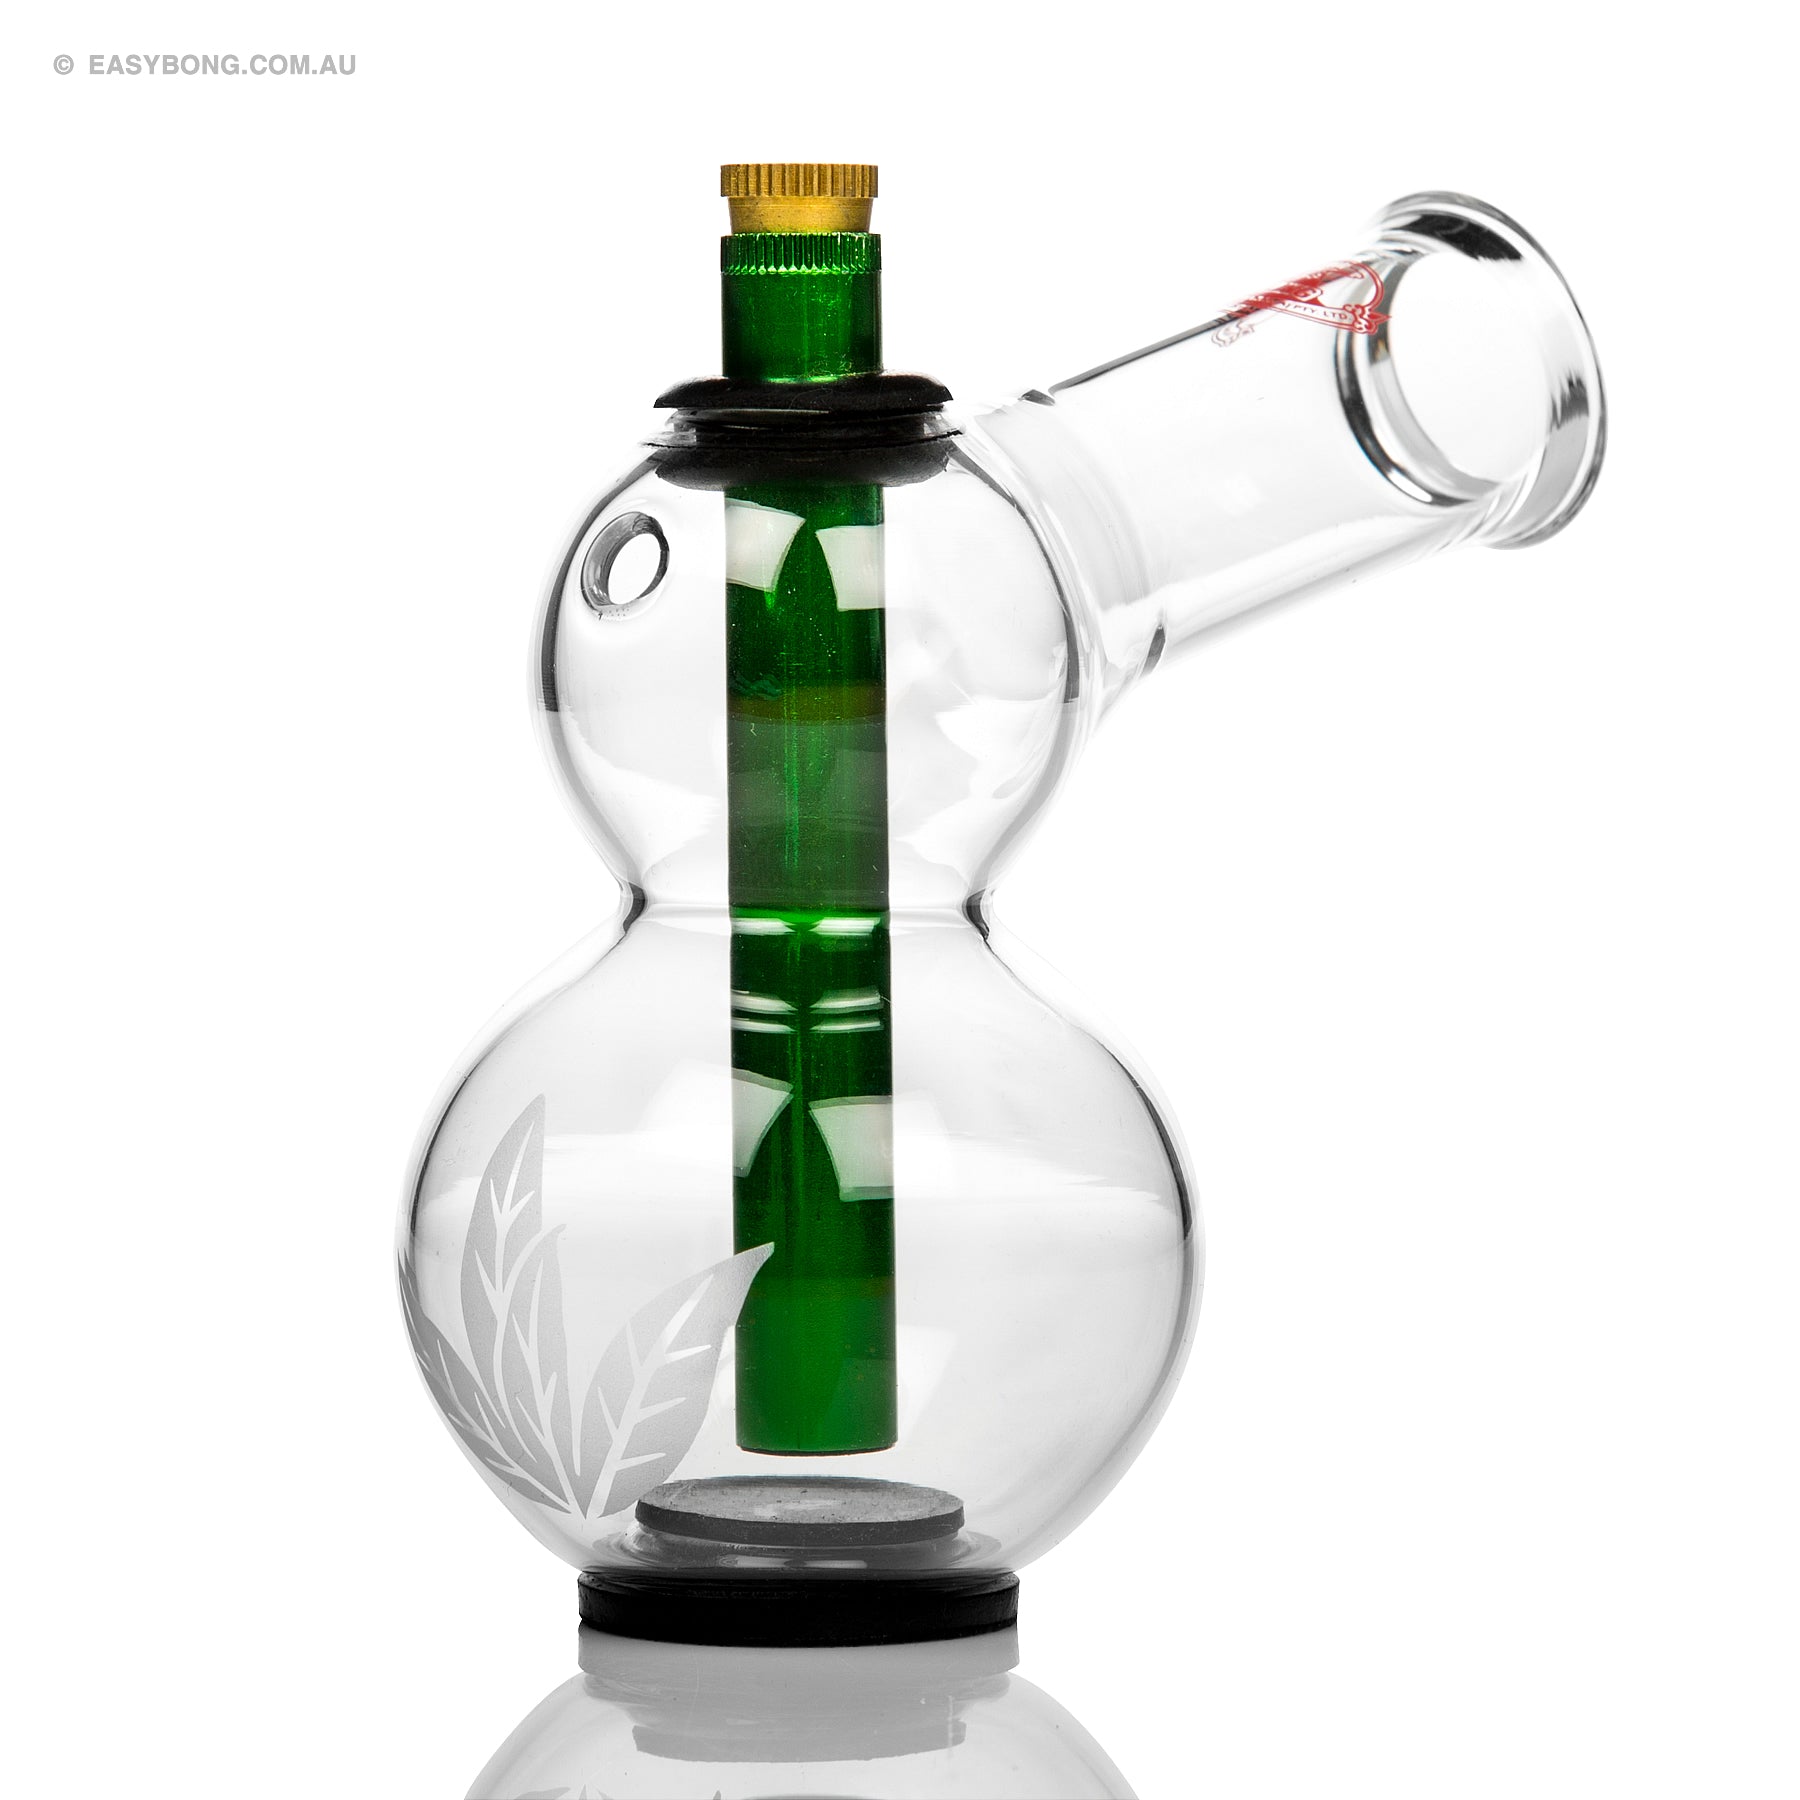 Agung blabber 14cm tall glass bong with metal stem and cone piece.